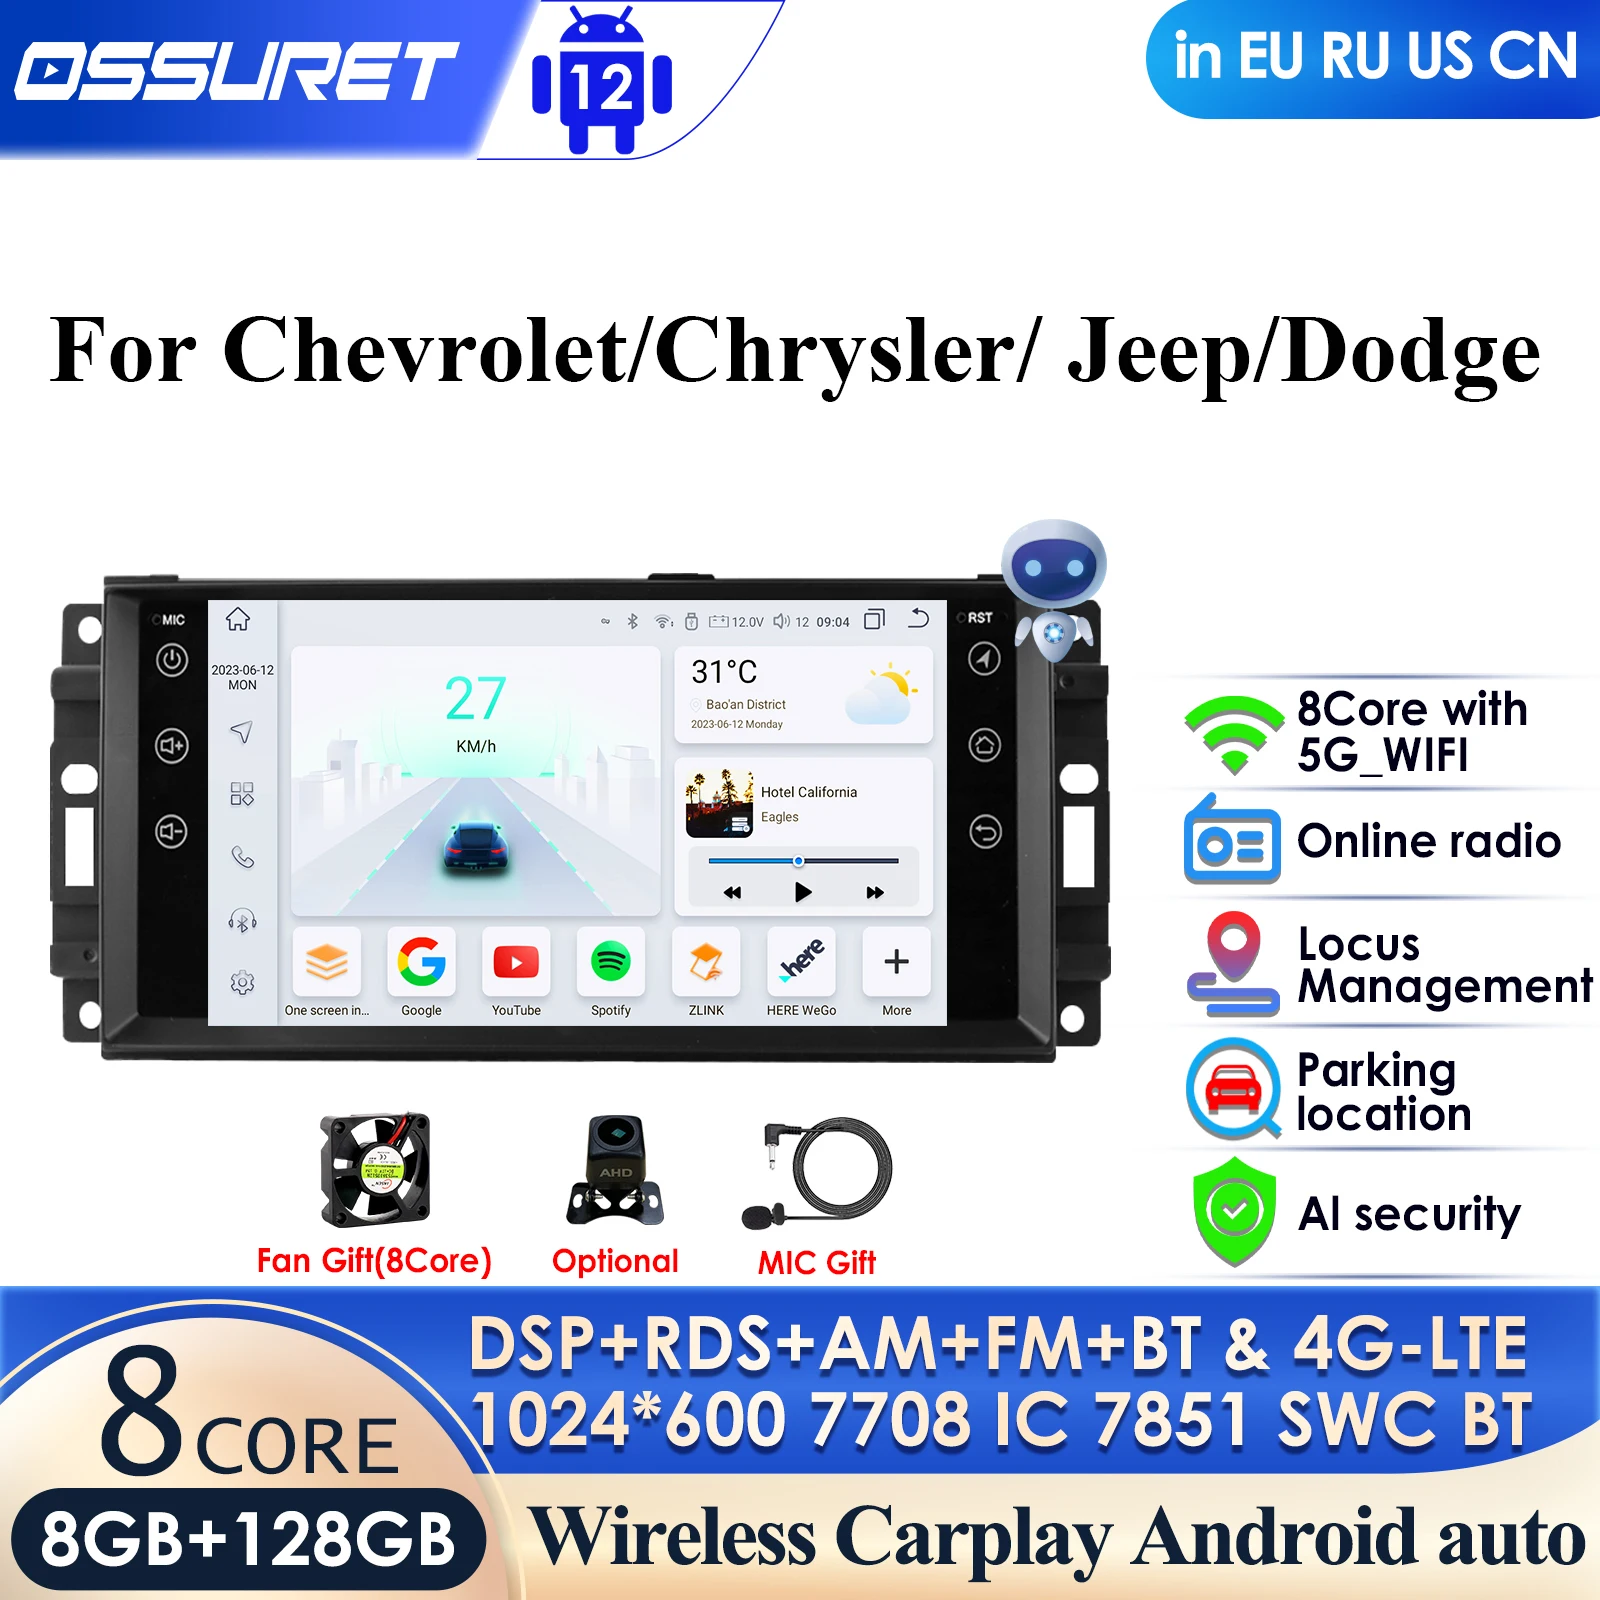 

Carplay 4G-LTE 7862 DSP 7 Inch 2 Din Android Car Radio GPS for Chevrolet Chrysler Jeep Dodge 2009 2010 2011 Multimedia Video RDS